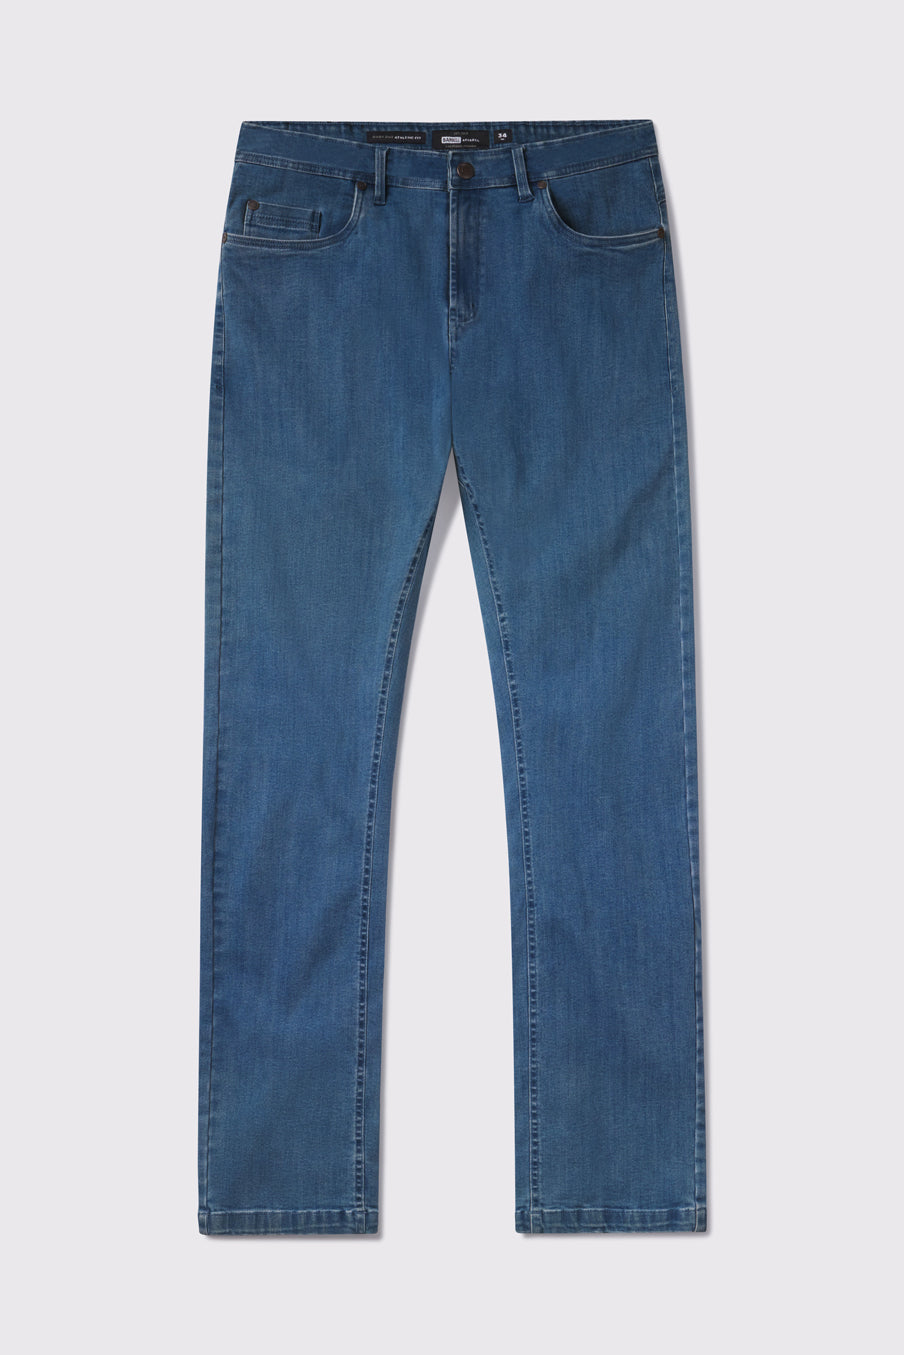 Mens Boot Cut Athletic Fit Jeans 2.0 -Light Wash - photo from front flat lay #color_light-wash